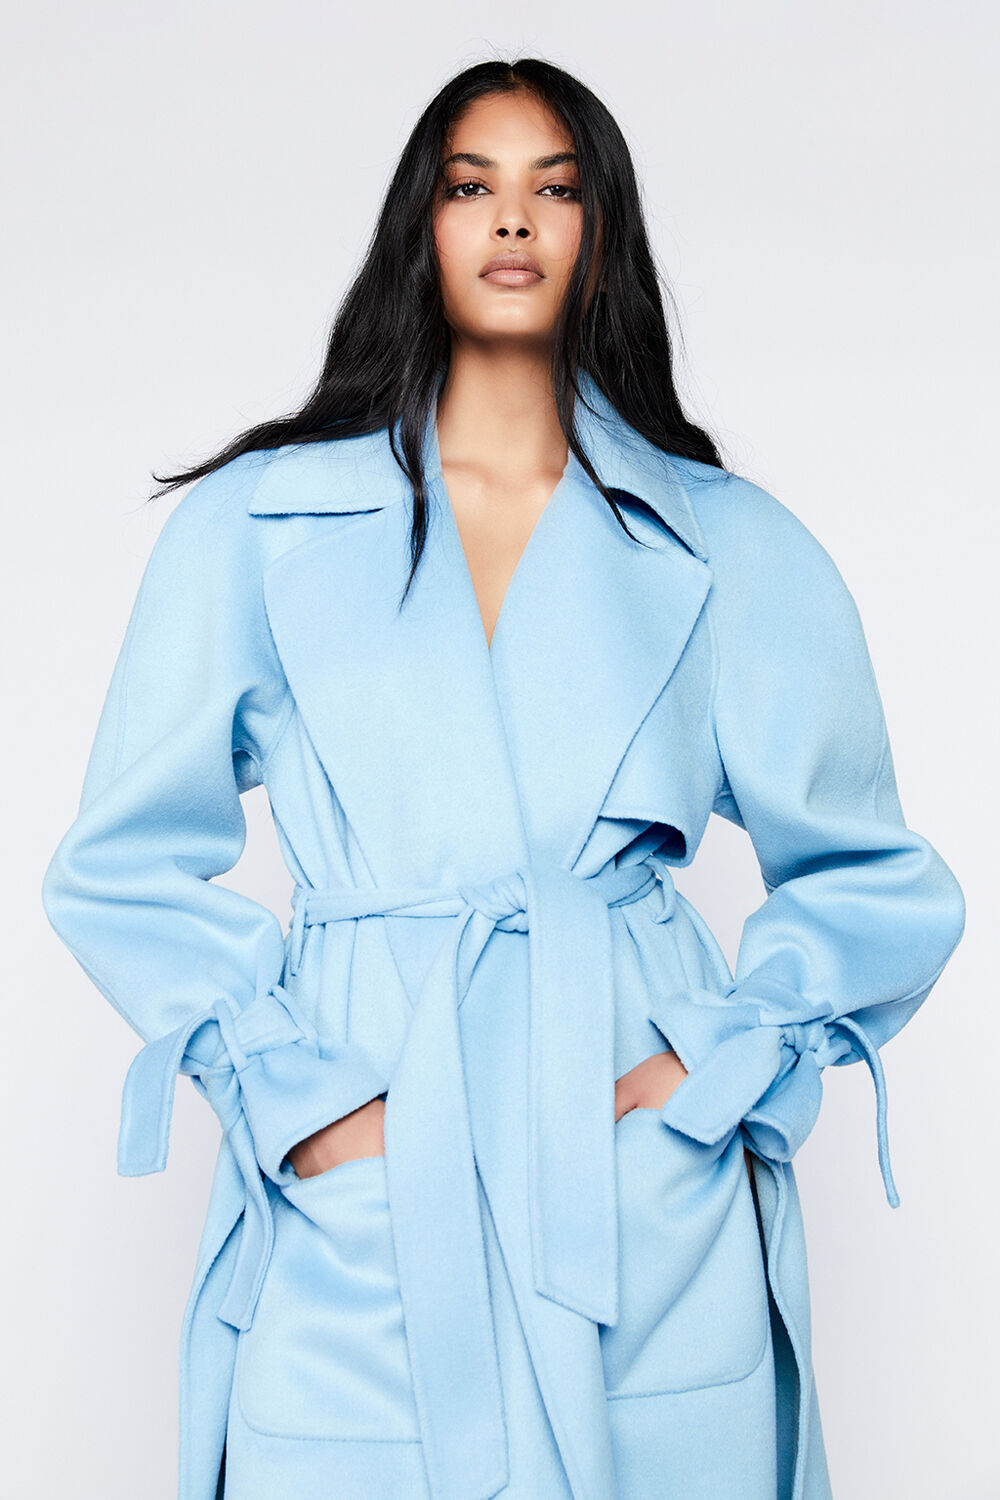 WOOL-RICH OVERSIZED TRENCH COAT in colour CROWN BLUE